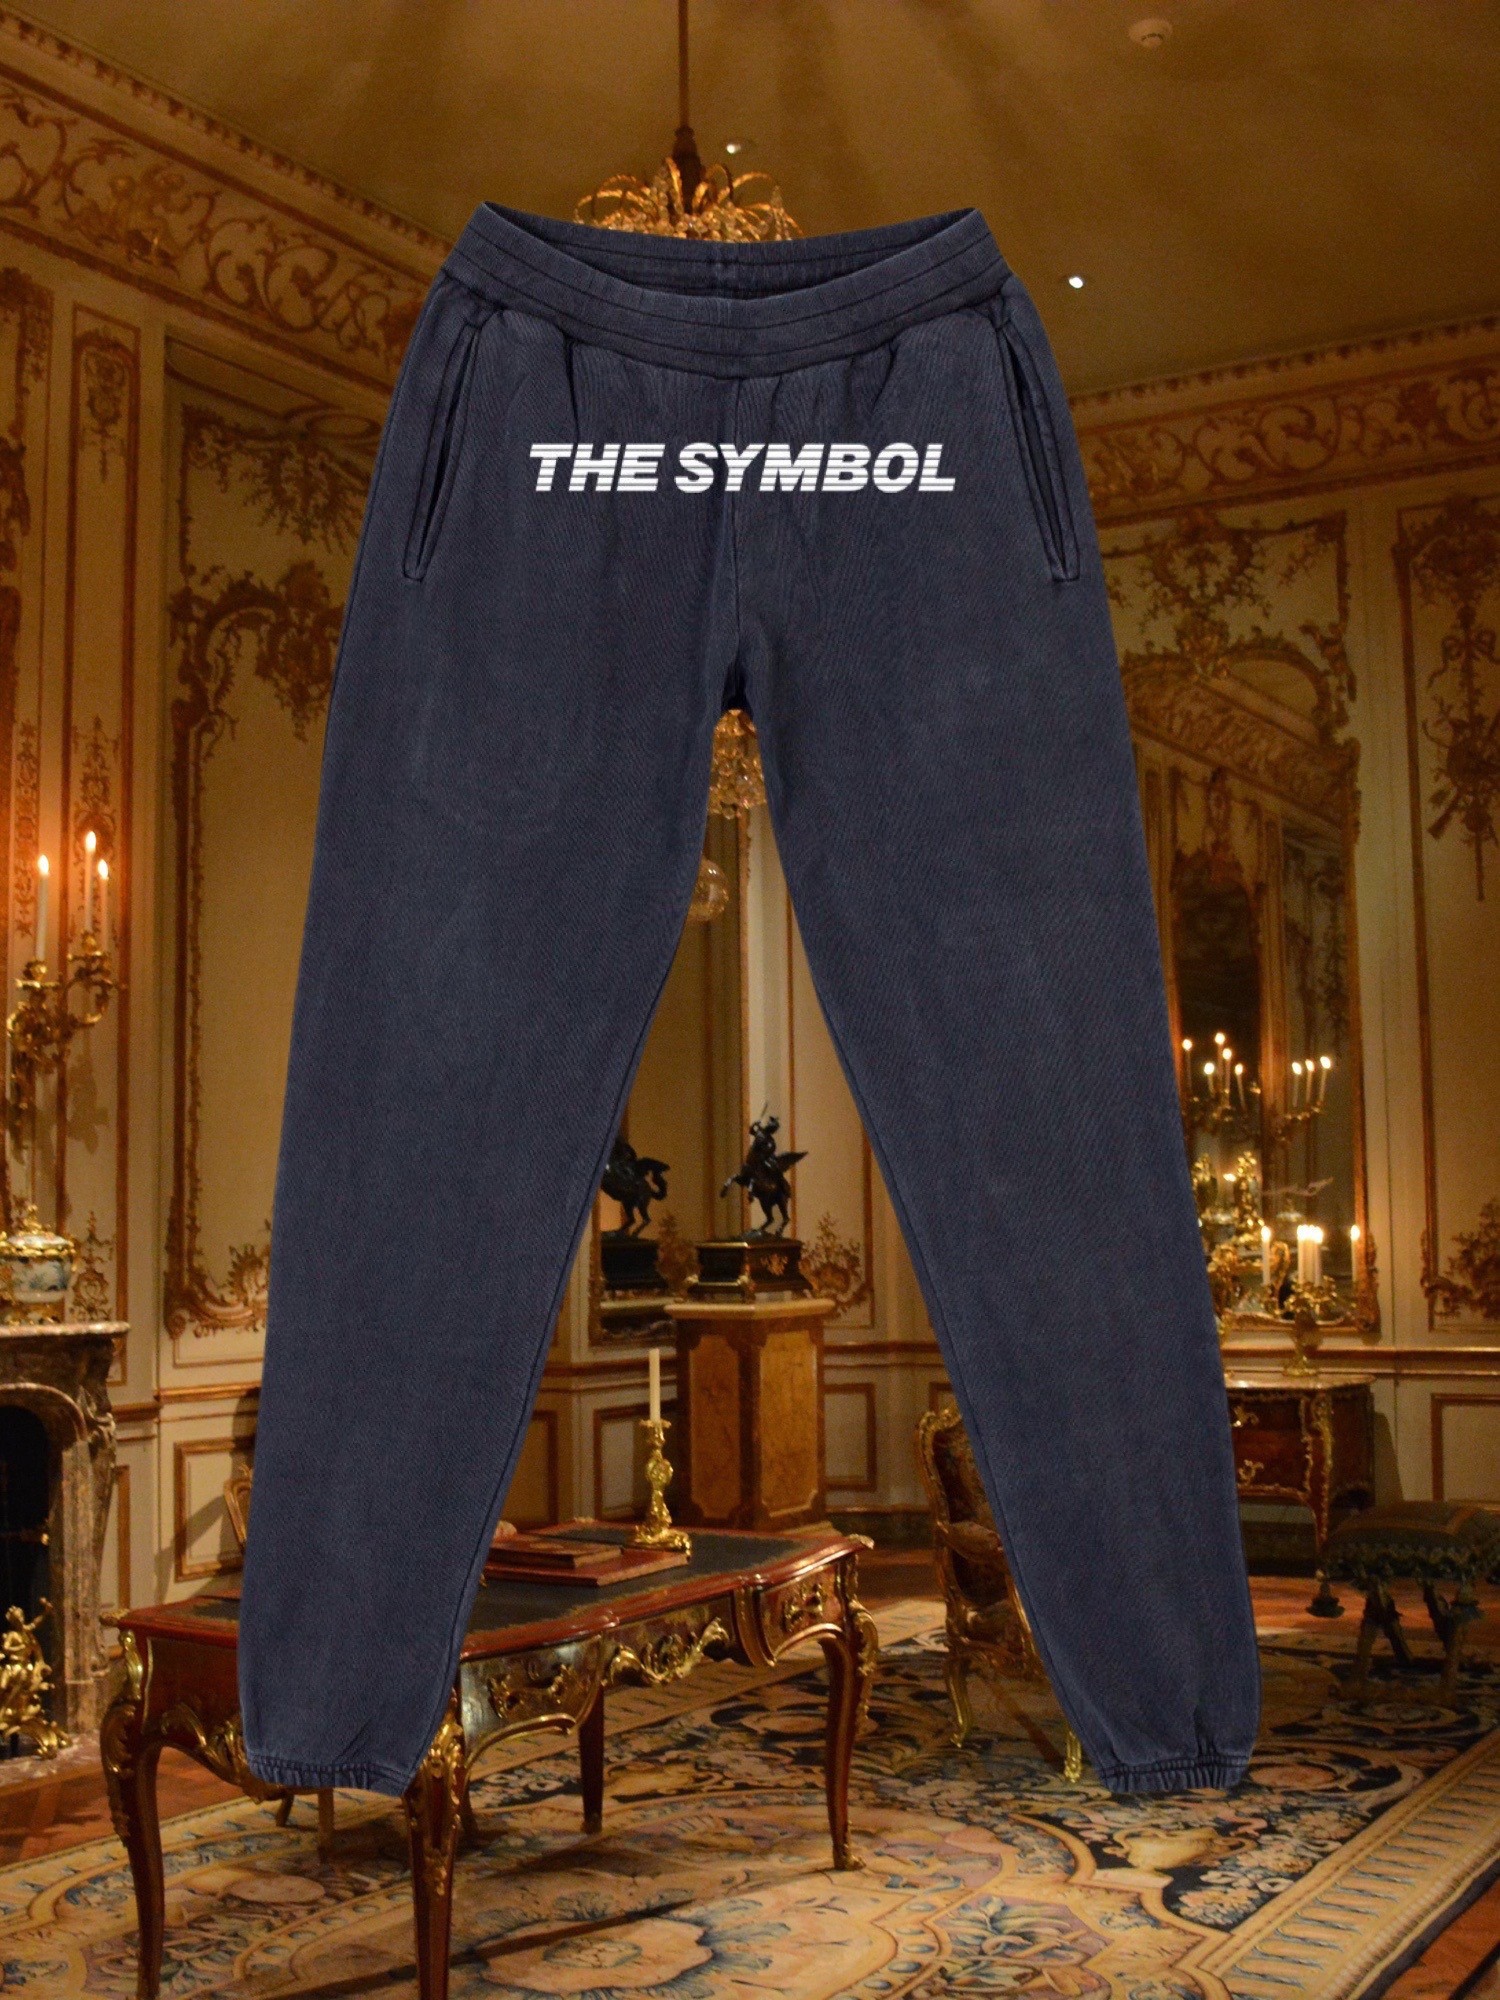 THE SYMBOL Vintage Collection Embroidery Sweatpants